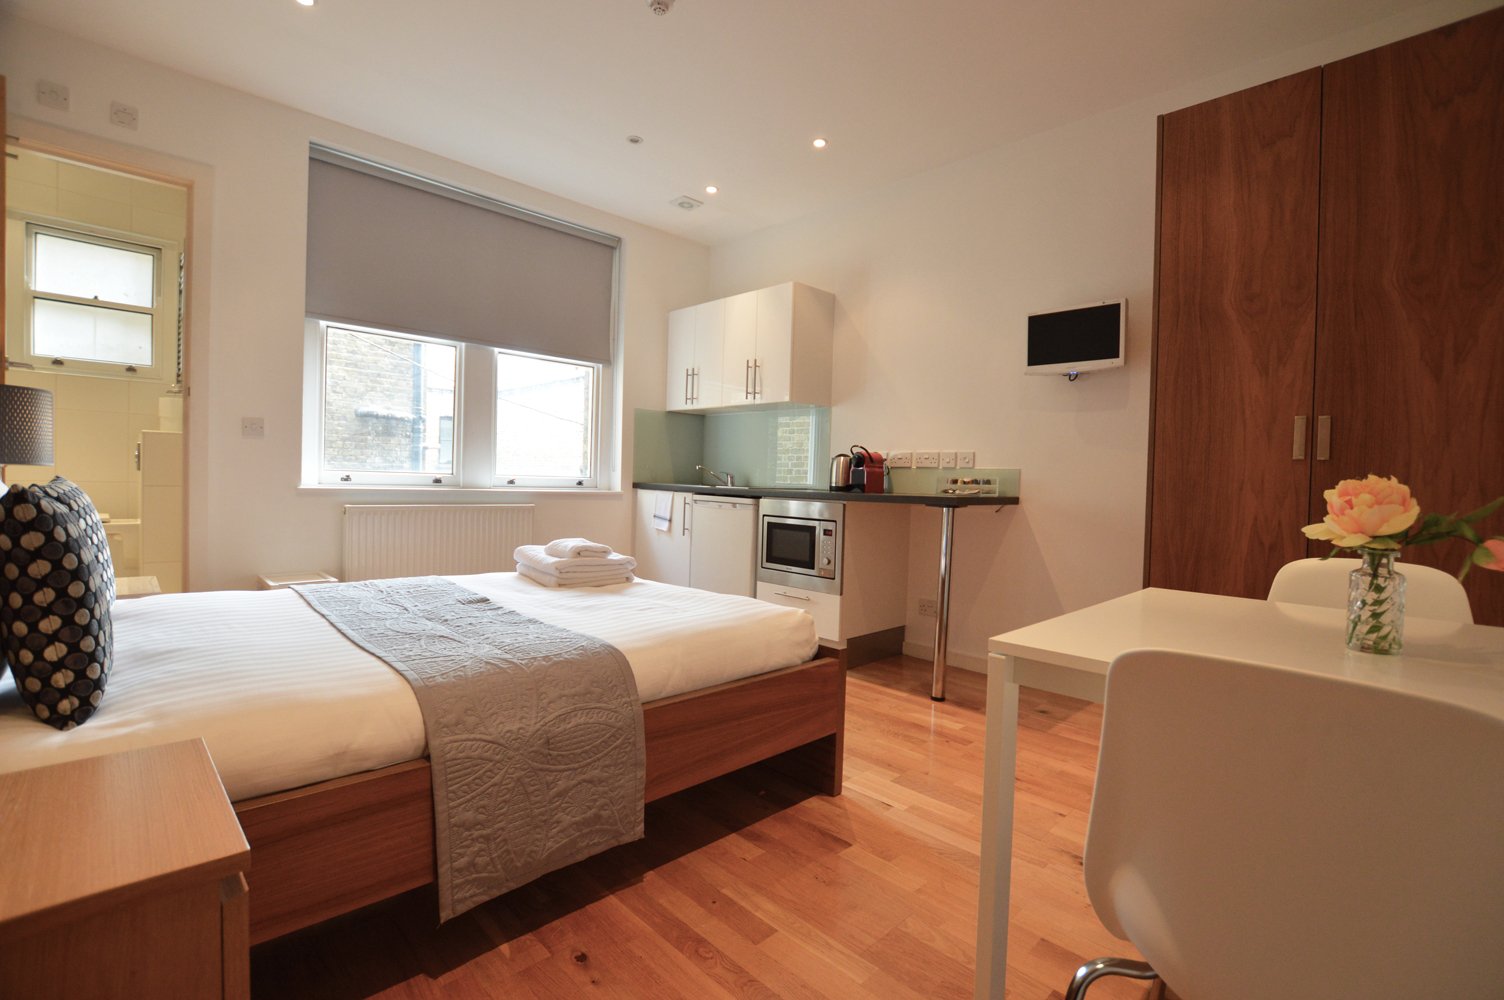 Russell-Square-Apartments-London-|-Modern-Accommodation-Russell-Square-|-Self-catering-Accommodation-London-|-Award-Winning-&-Accredited-|-BOOK-NOW